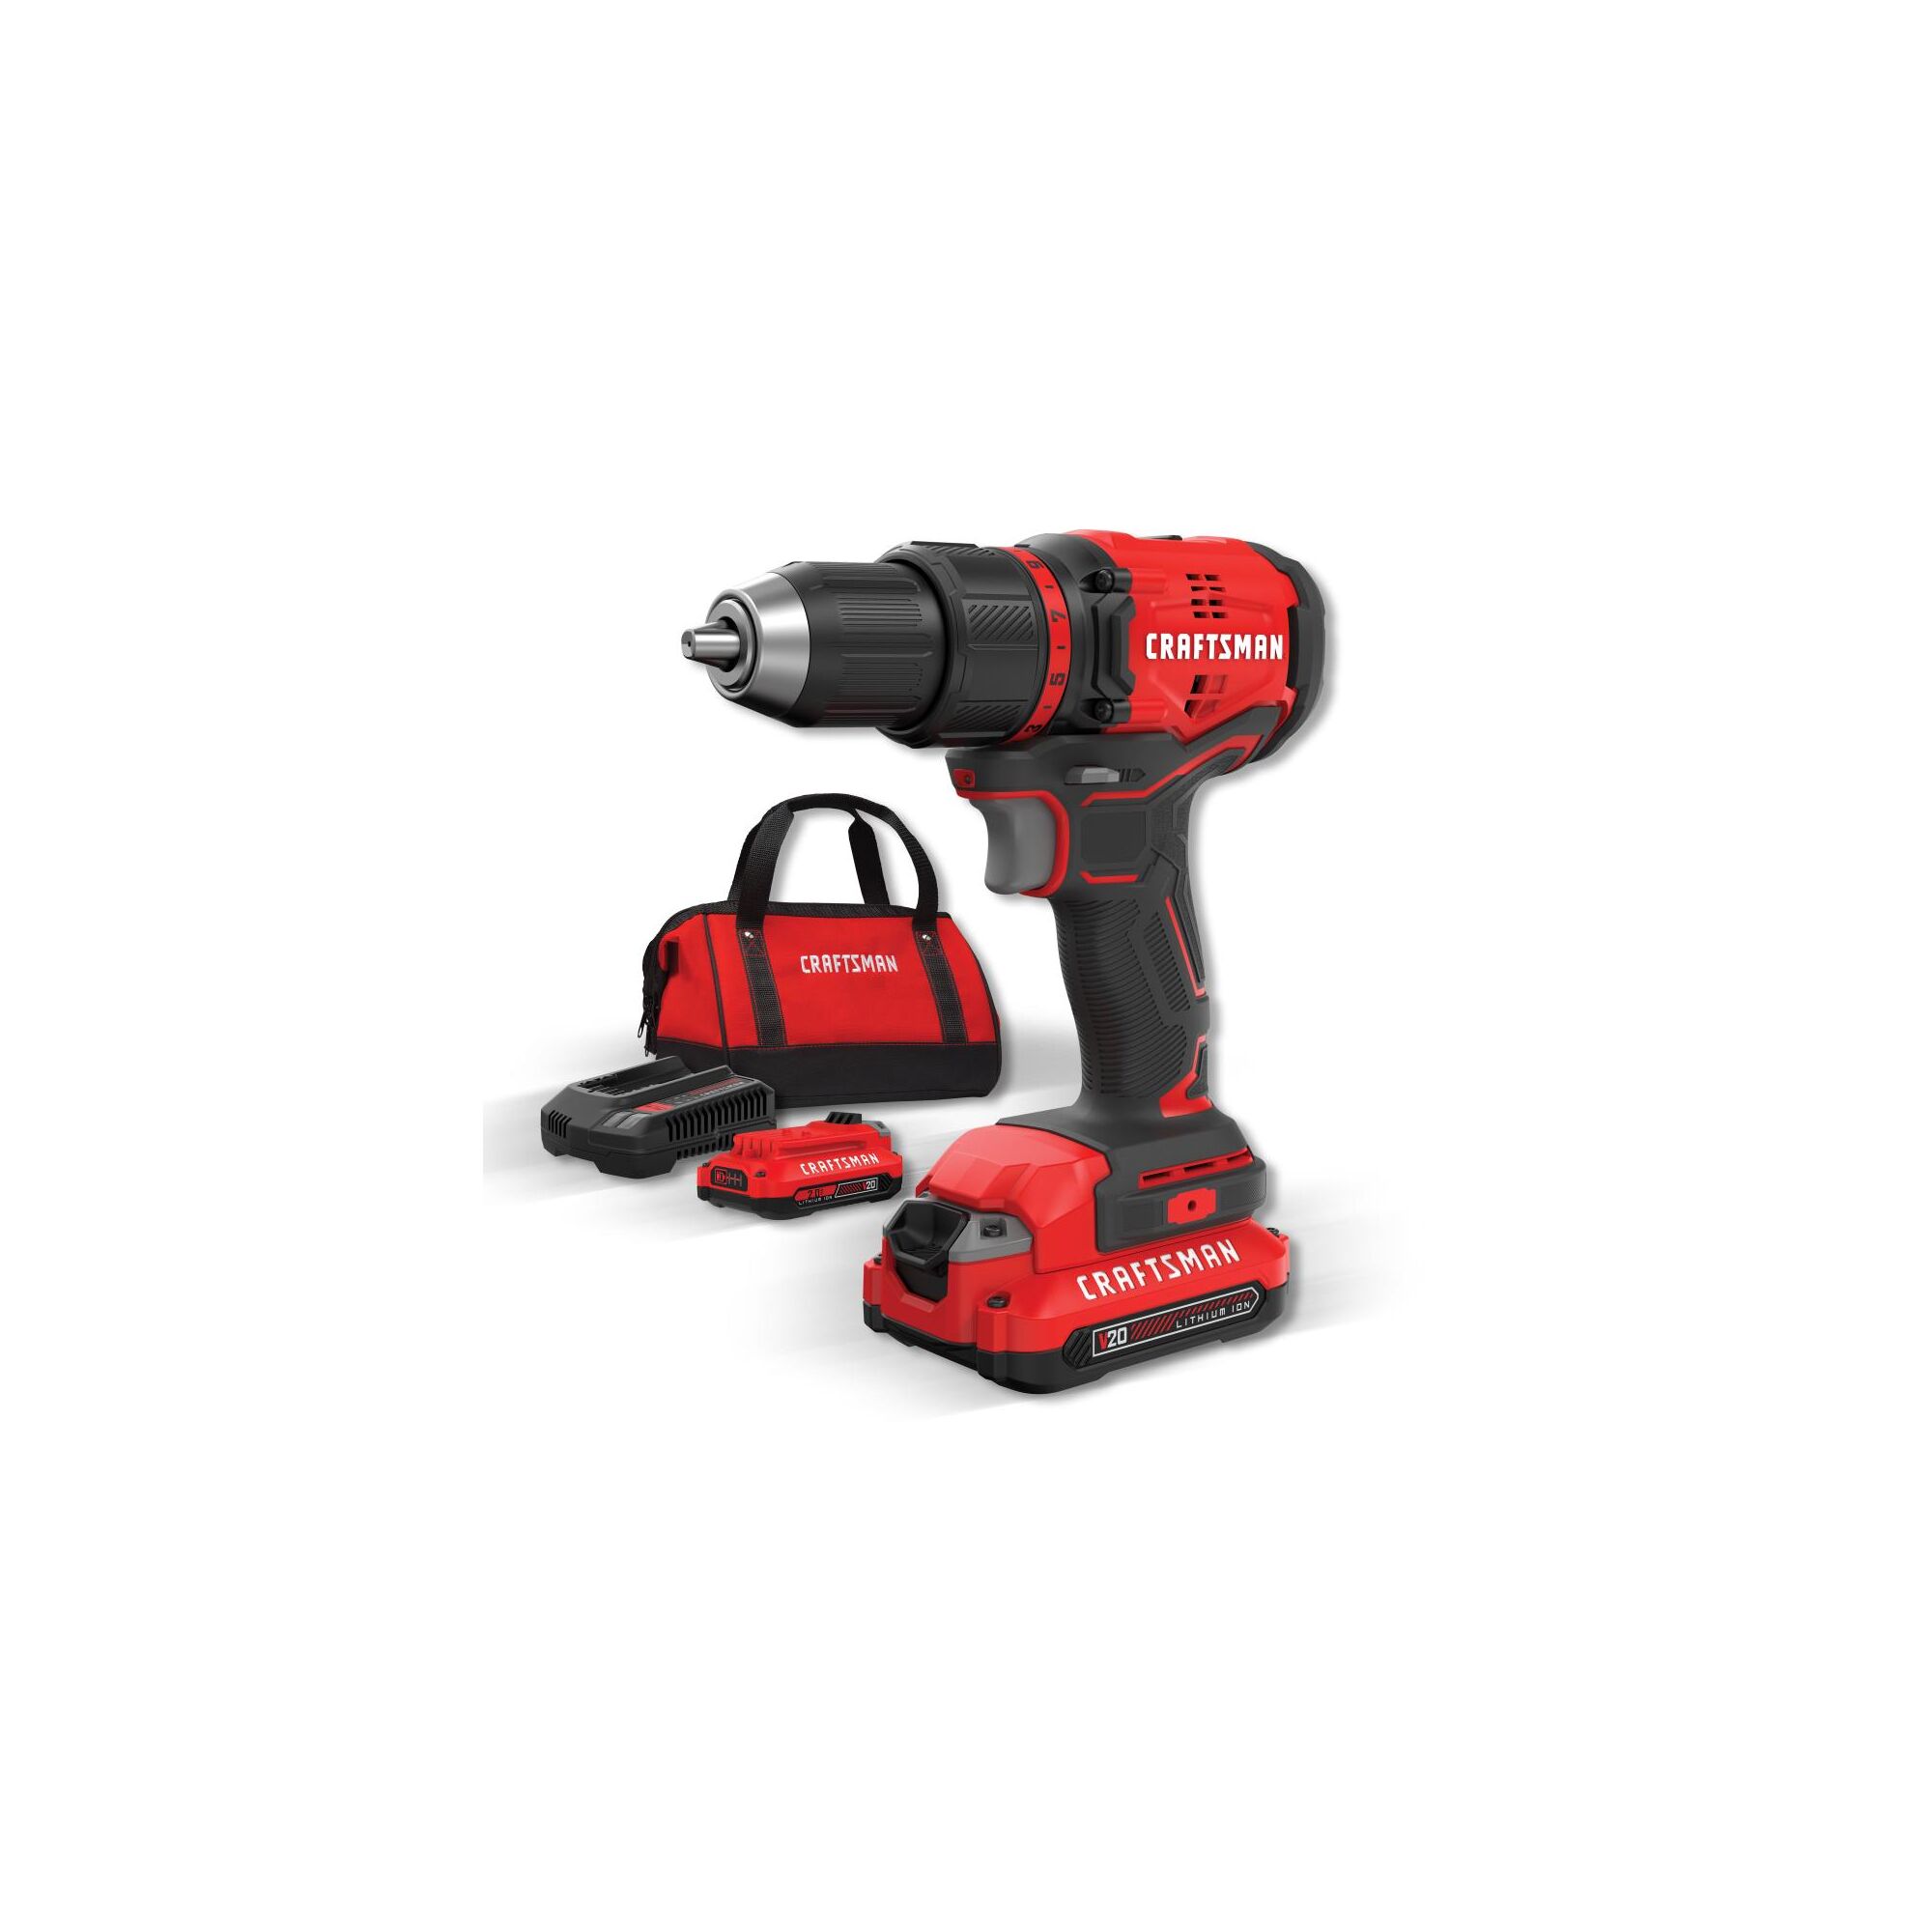 View of CRAFTSMAN Drills: Compact and additional tools in the kit